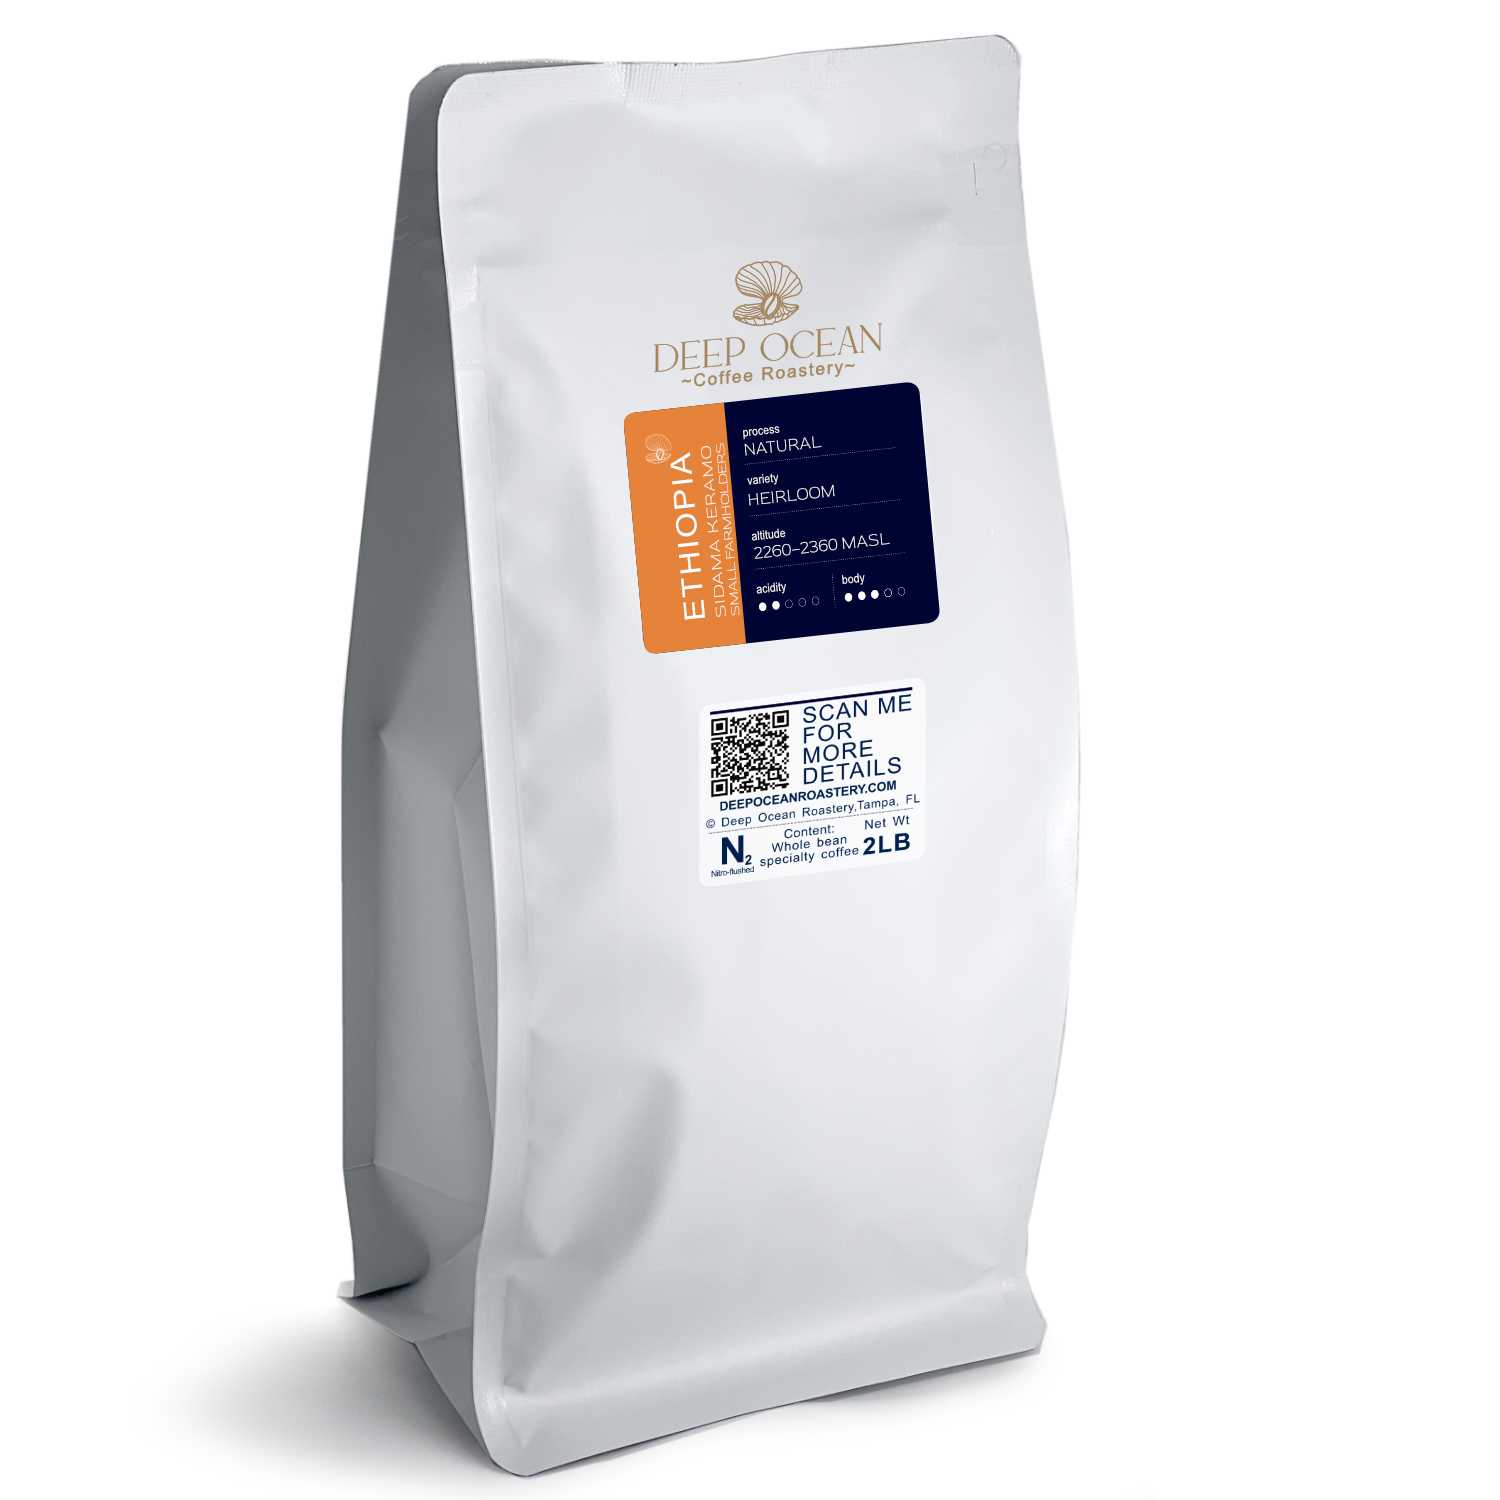 variant 1 - medium roasted coffee Ethiopia is great choice of specialty coffee.